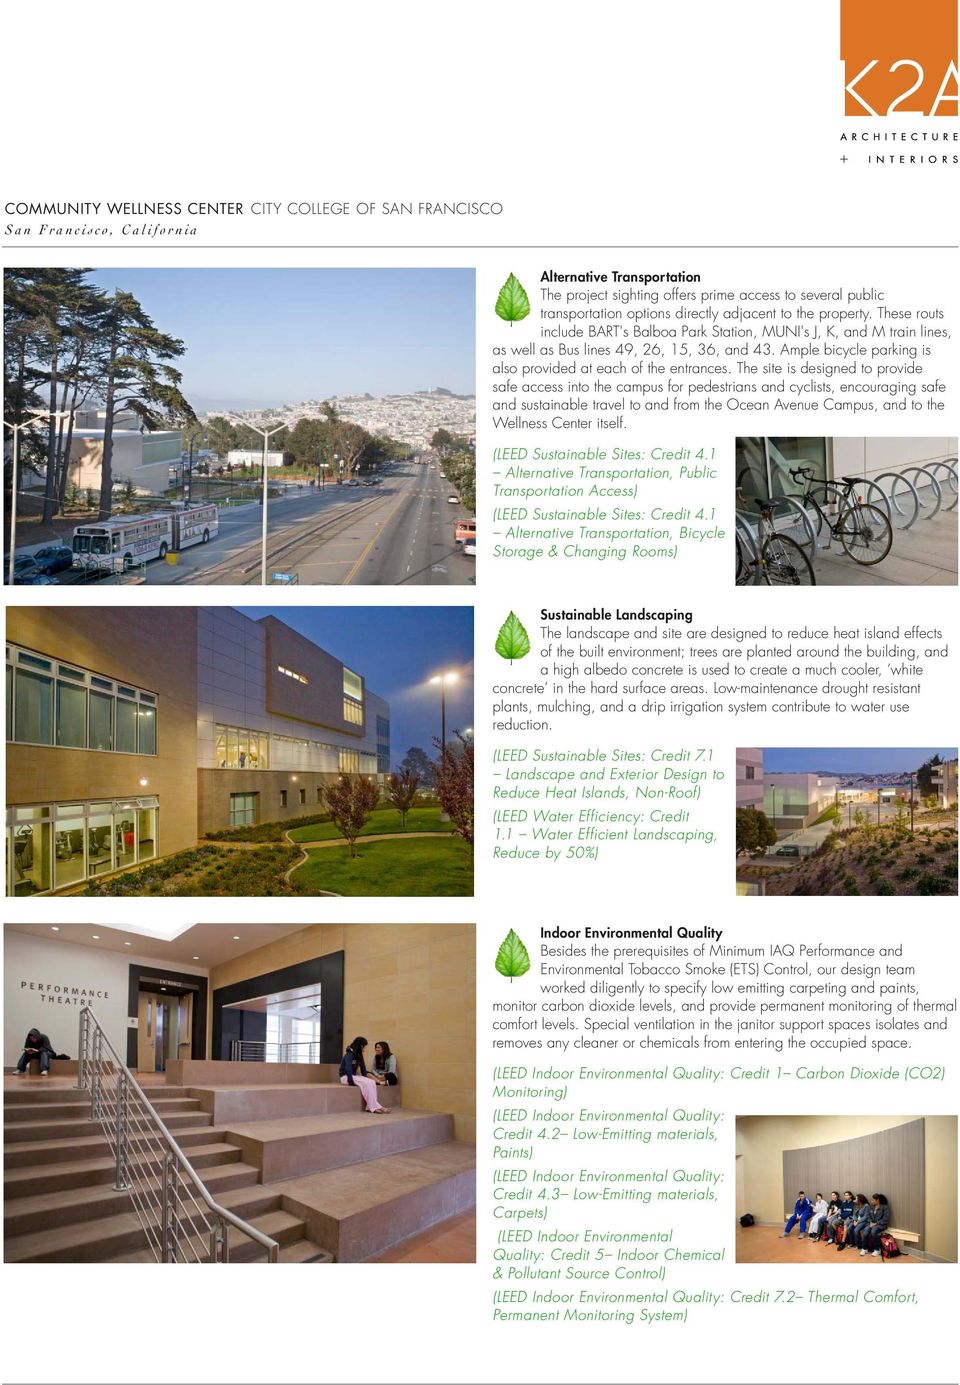 The site is designed to provide safe access into the campus for pedestrians and cyclists, encouraging safe and sustainable travel to and from the Ocean Avenue Campus, and to the Wellness Center